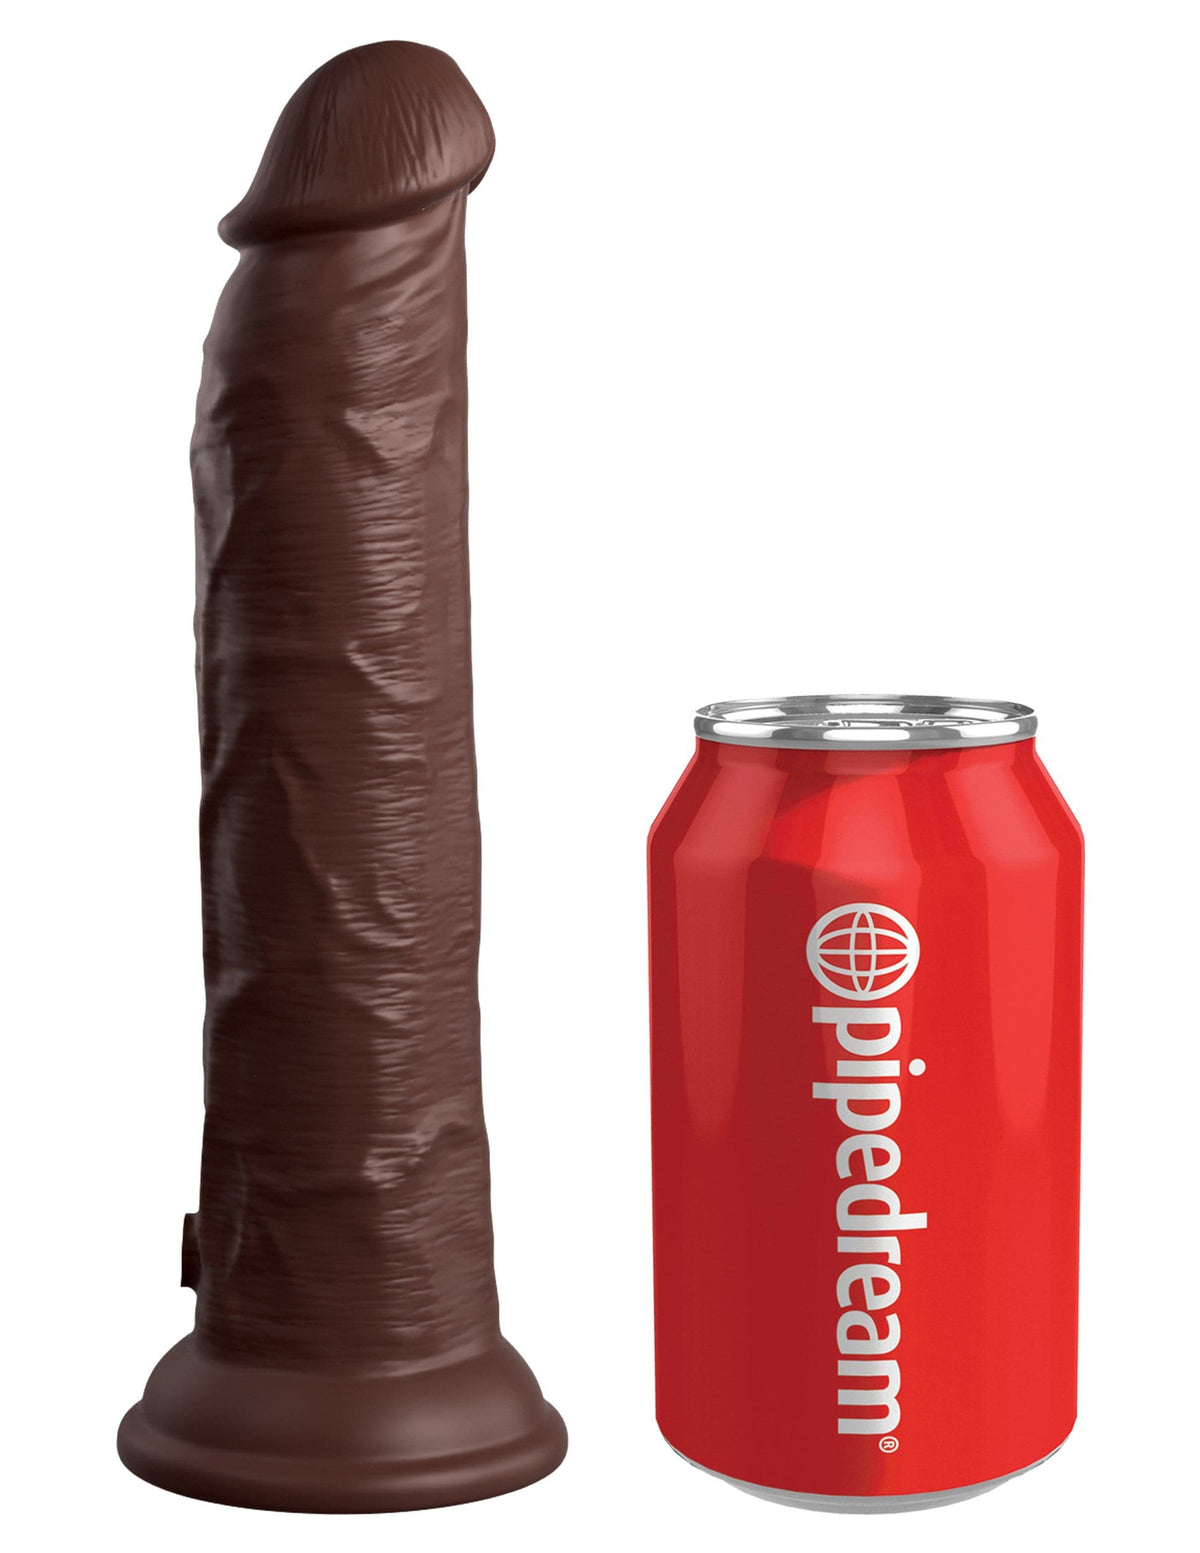 king cock elite 9 inch vibrating silicone dual density cock with remote brown